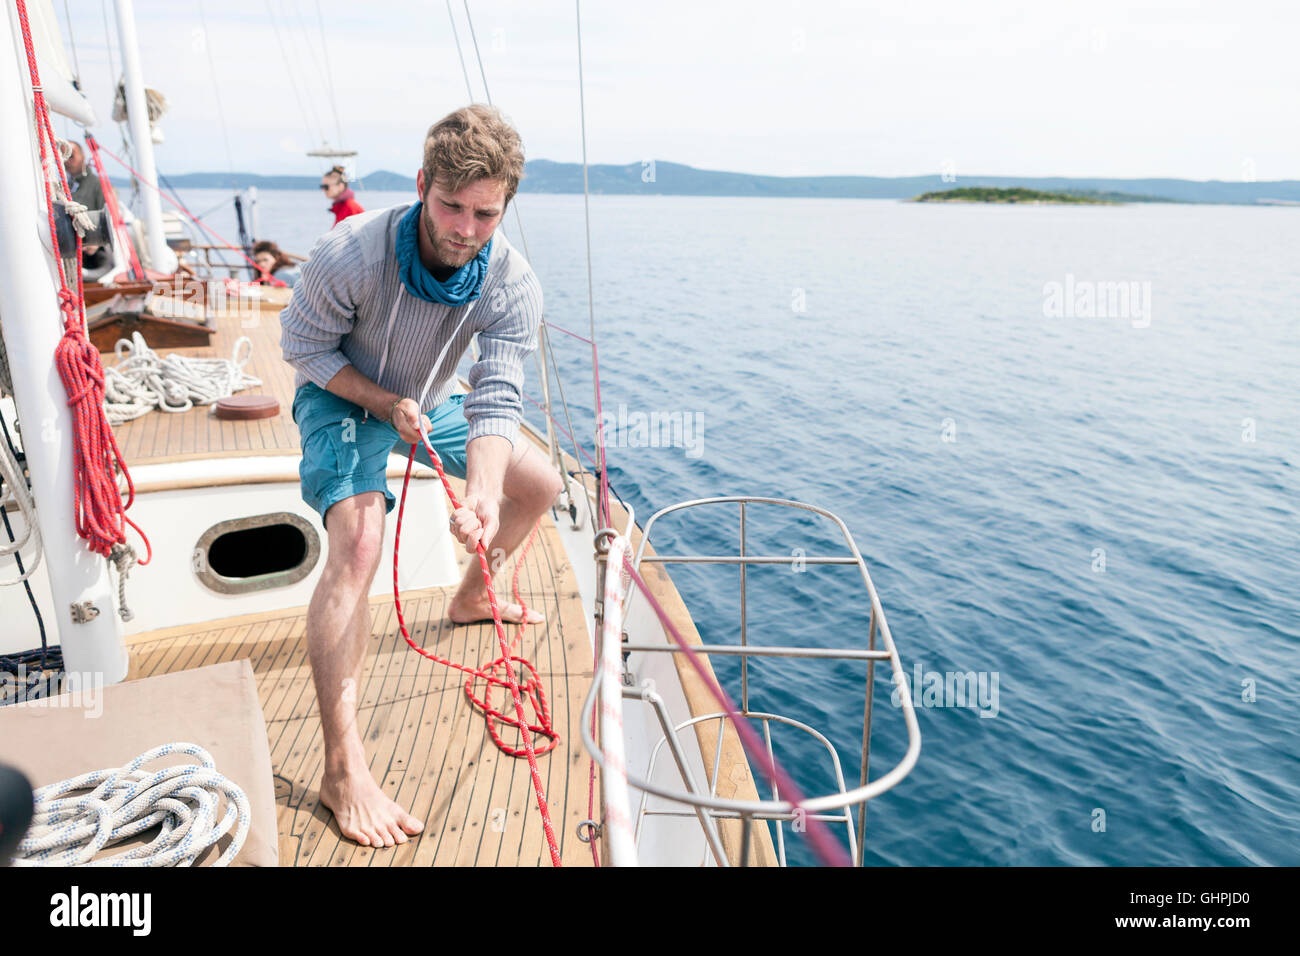 Man pulling on rope on yacht Stock Photo